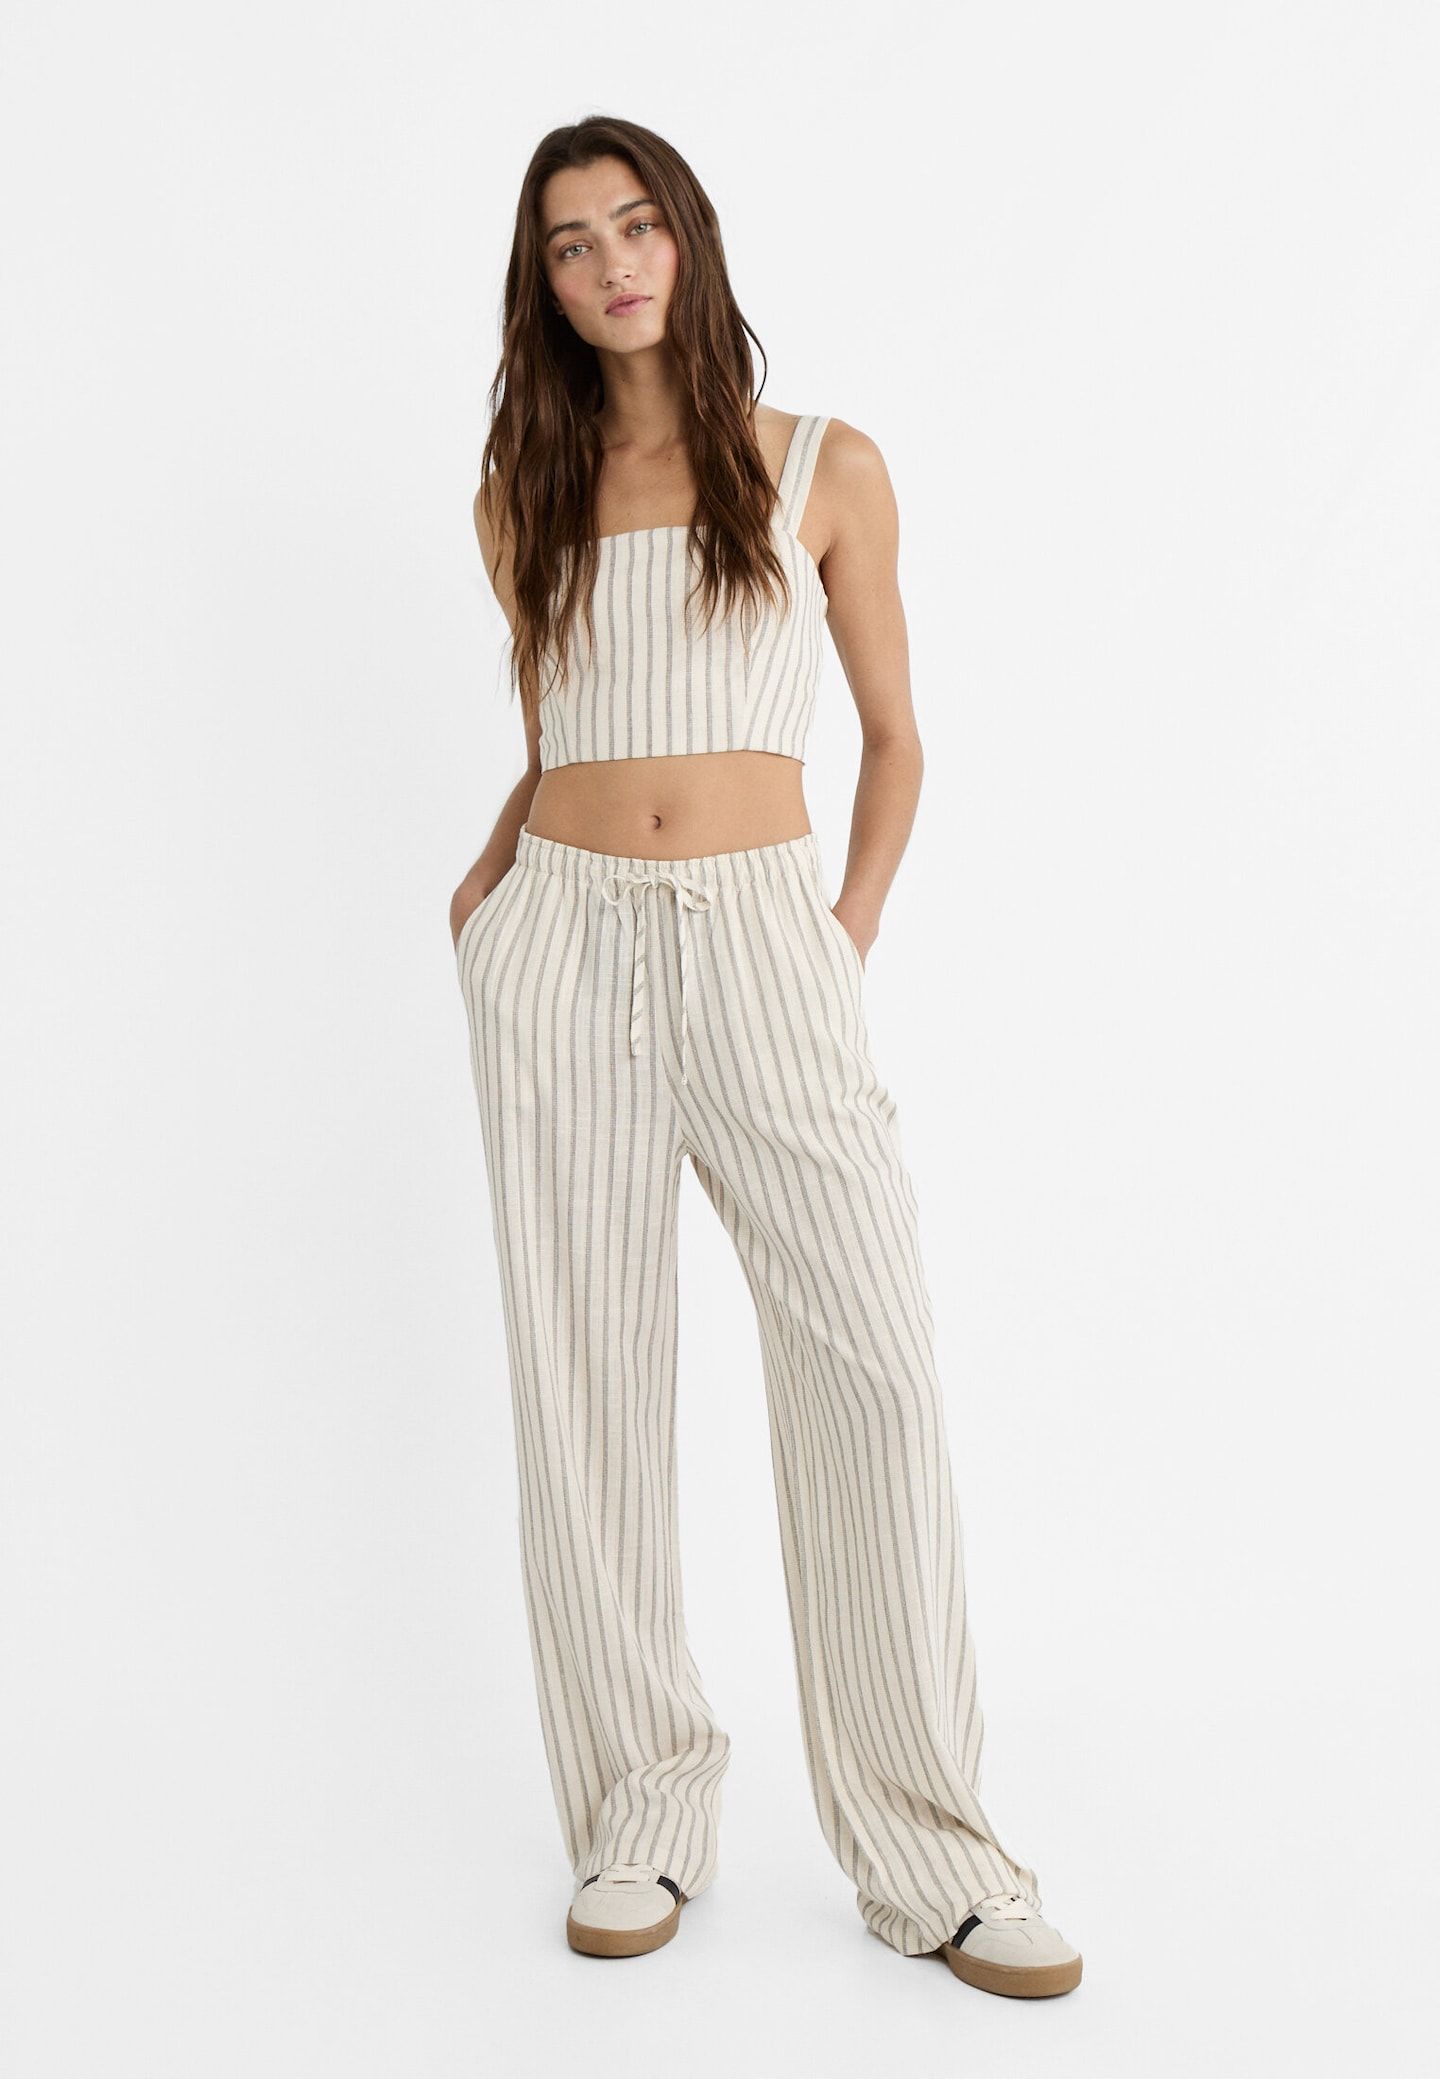 Striped flowing linen blend trousers with elasticated waistband | Stradivarius (UK)